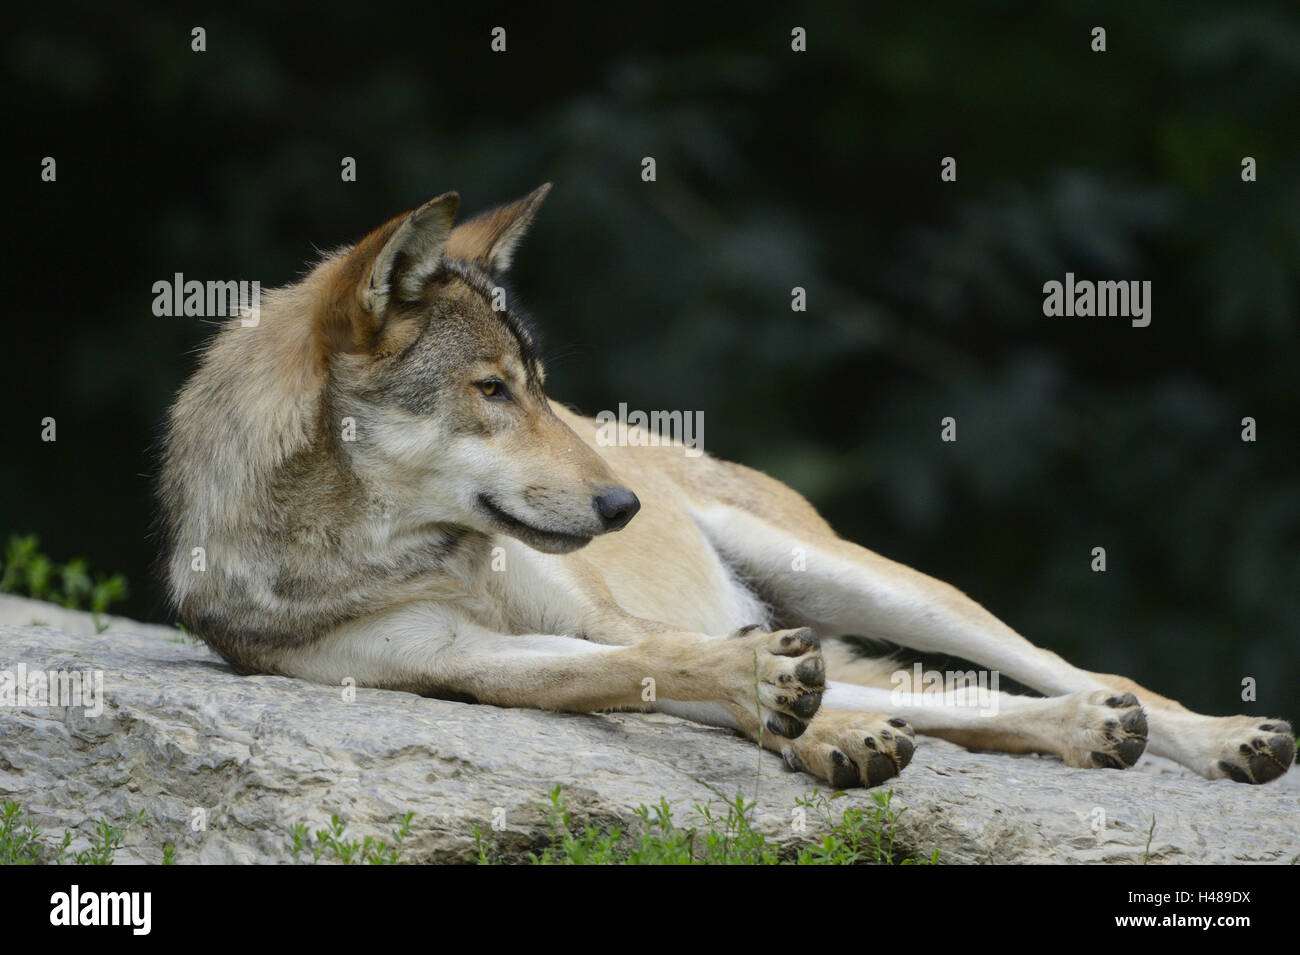 Eastern Timber Wolf, Canis lupus lycaon, rock, mensonge, vue latérale, Banque D'Images